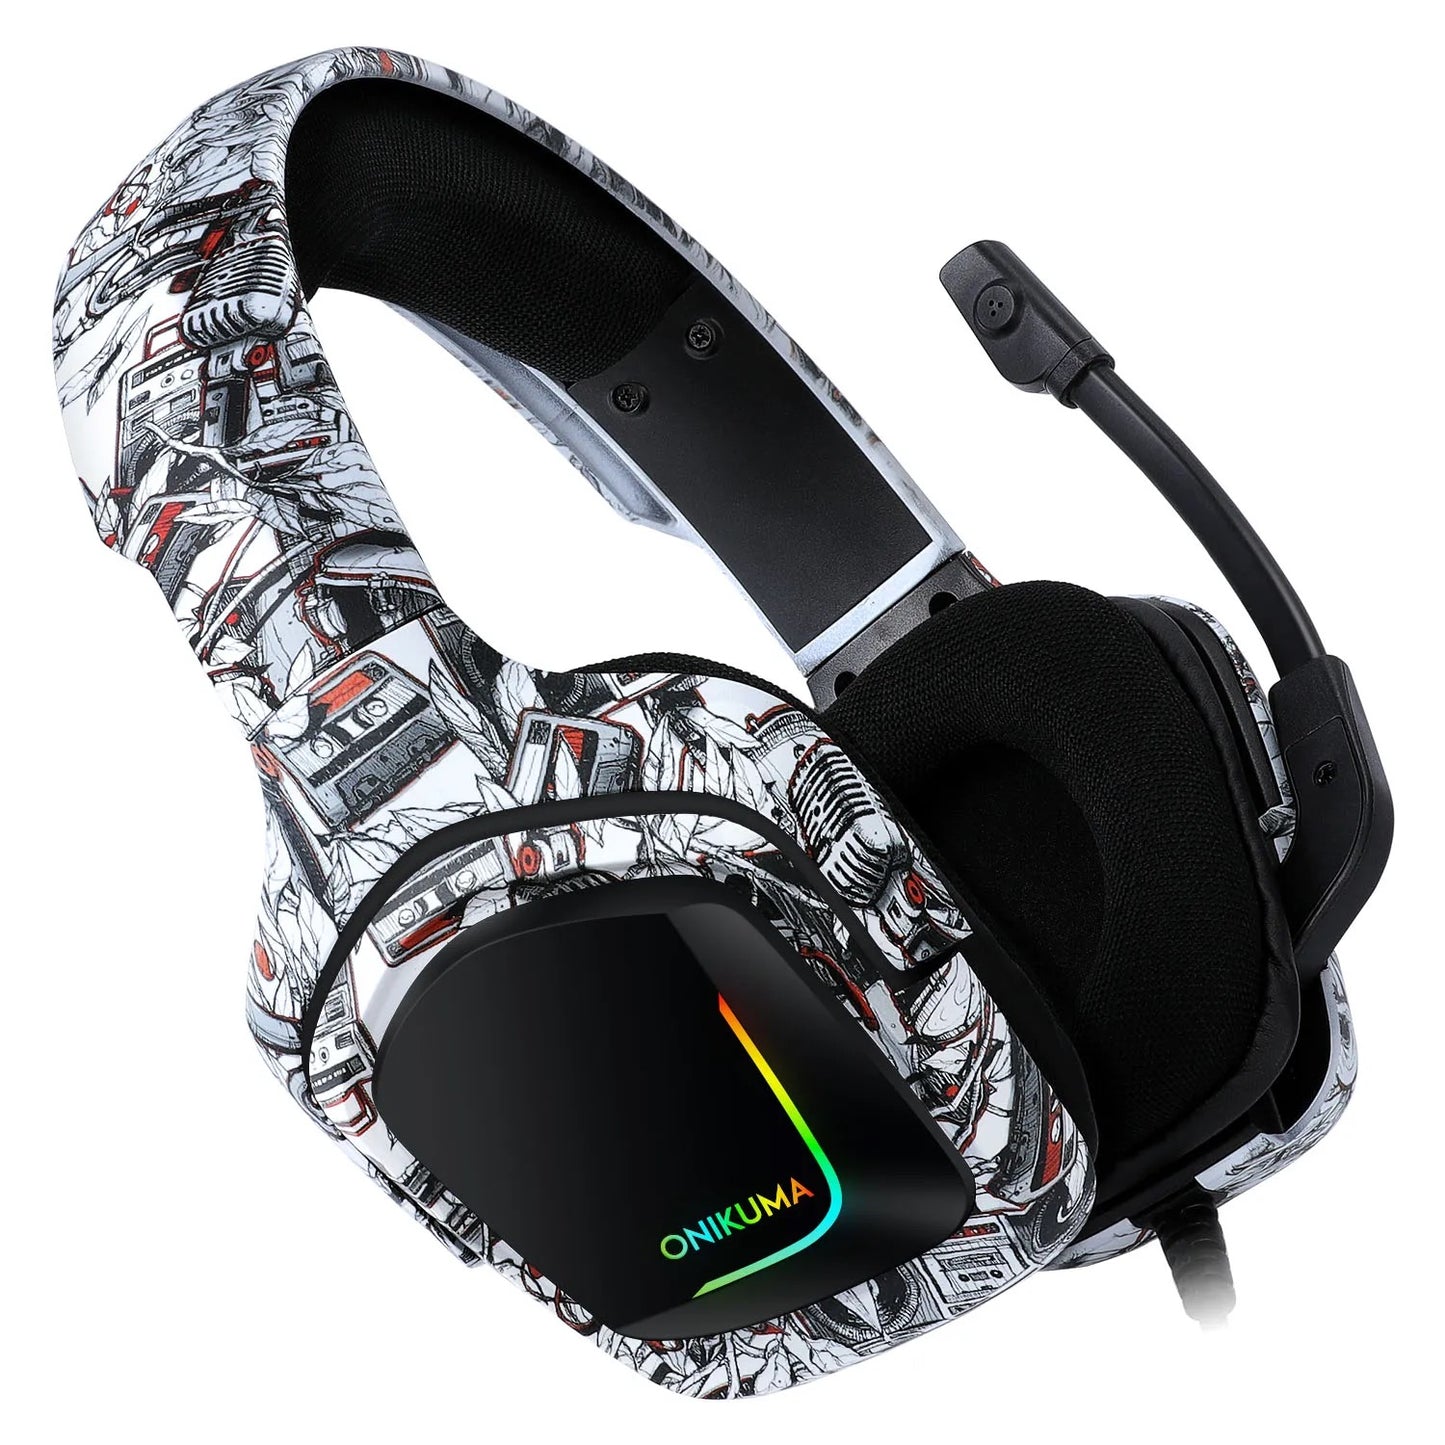 New Styles Camo/black Gaming Headset Headphones Over ear on ear headset with Microphone for PC Xbox One PS4